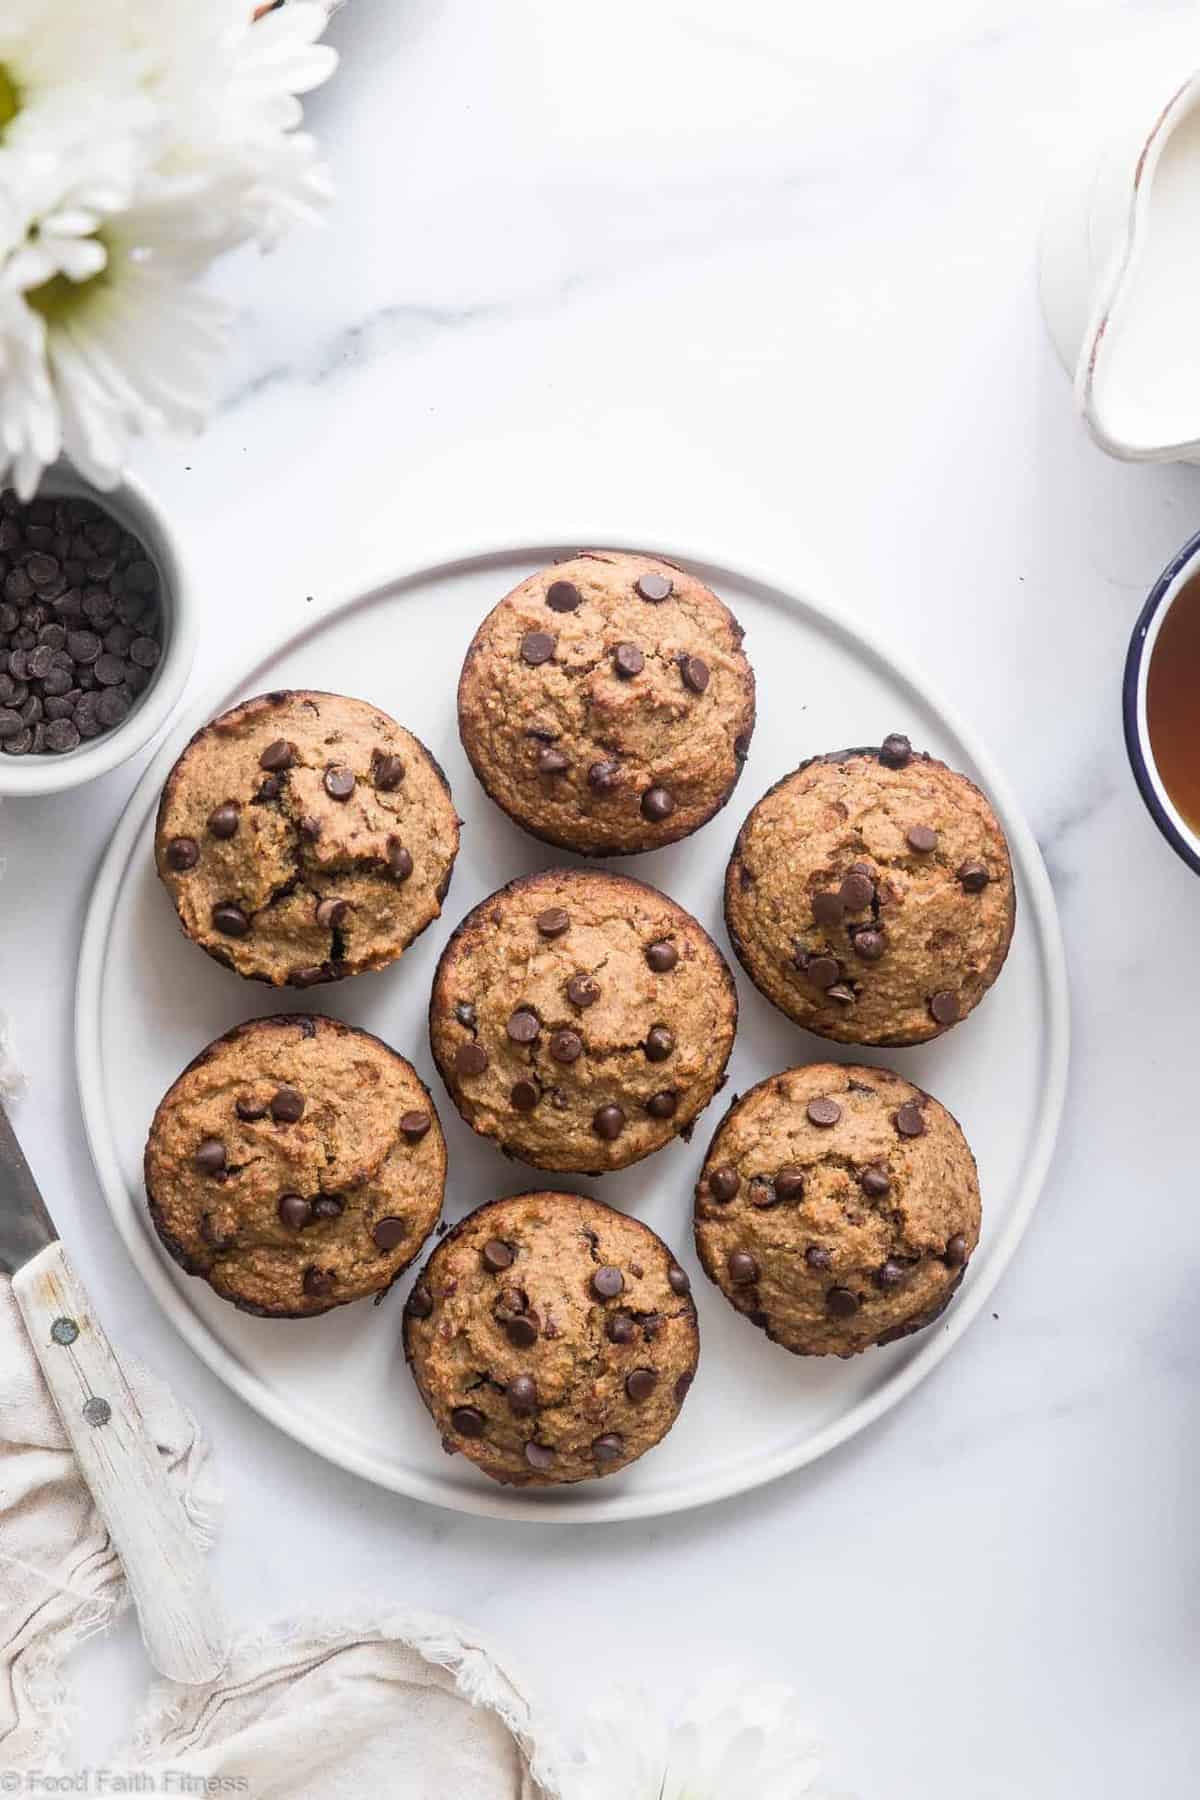 Healthy Gluten Free Zucchini Muffins - These dairy free Zucchini Muffins are fluffy and gluten, dairy, oil and sugar free! Sweetened with dates, studded with chocolate chips and only 170 calories! Great for kids and adults! | #Foodfaithfitness | #Glutenfree #Dairyfree #Healthy #Zucchini #sugarfree